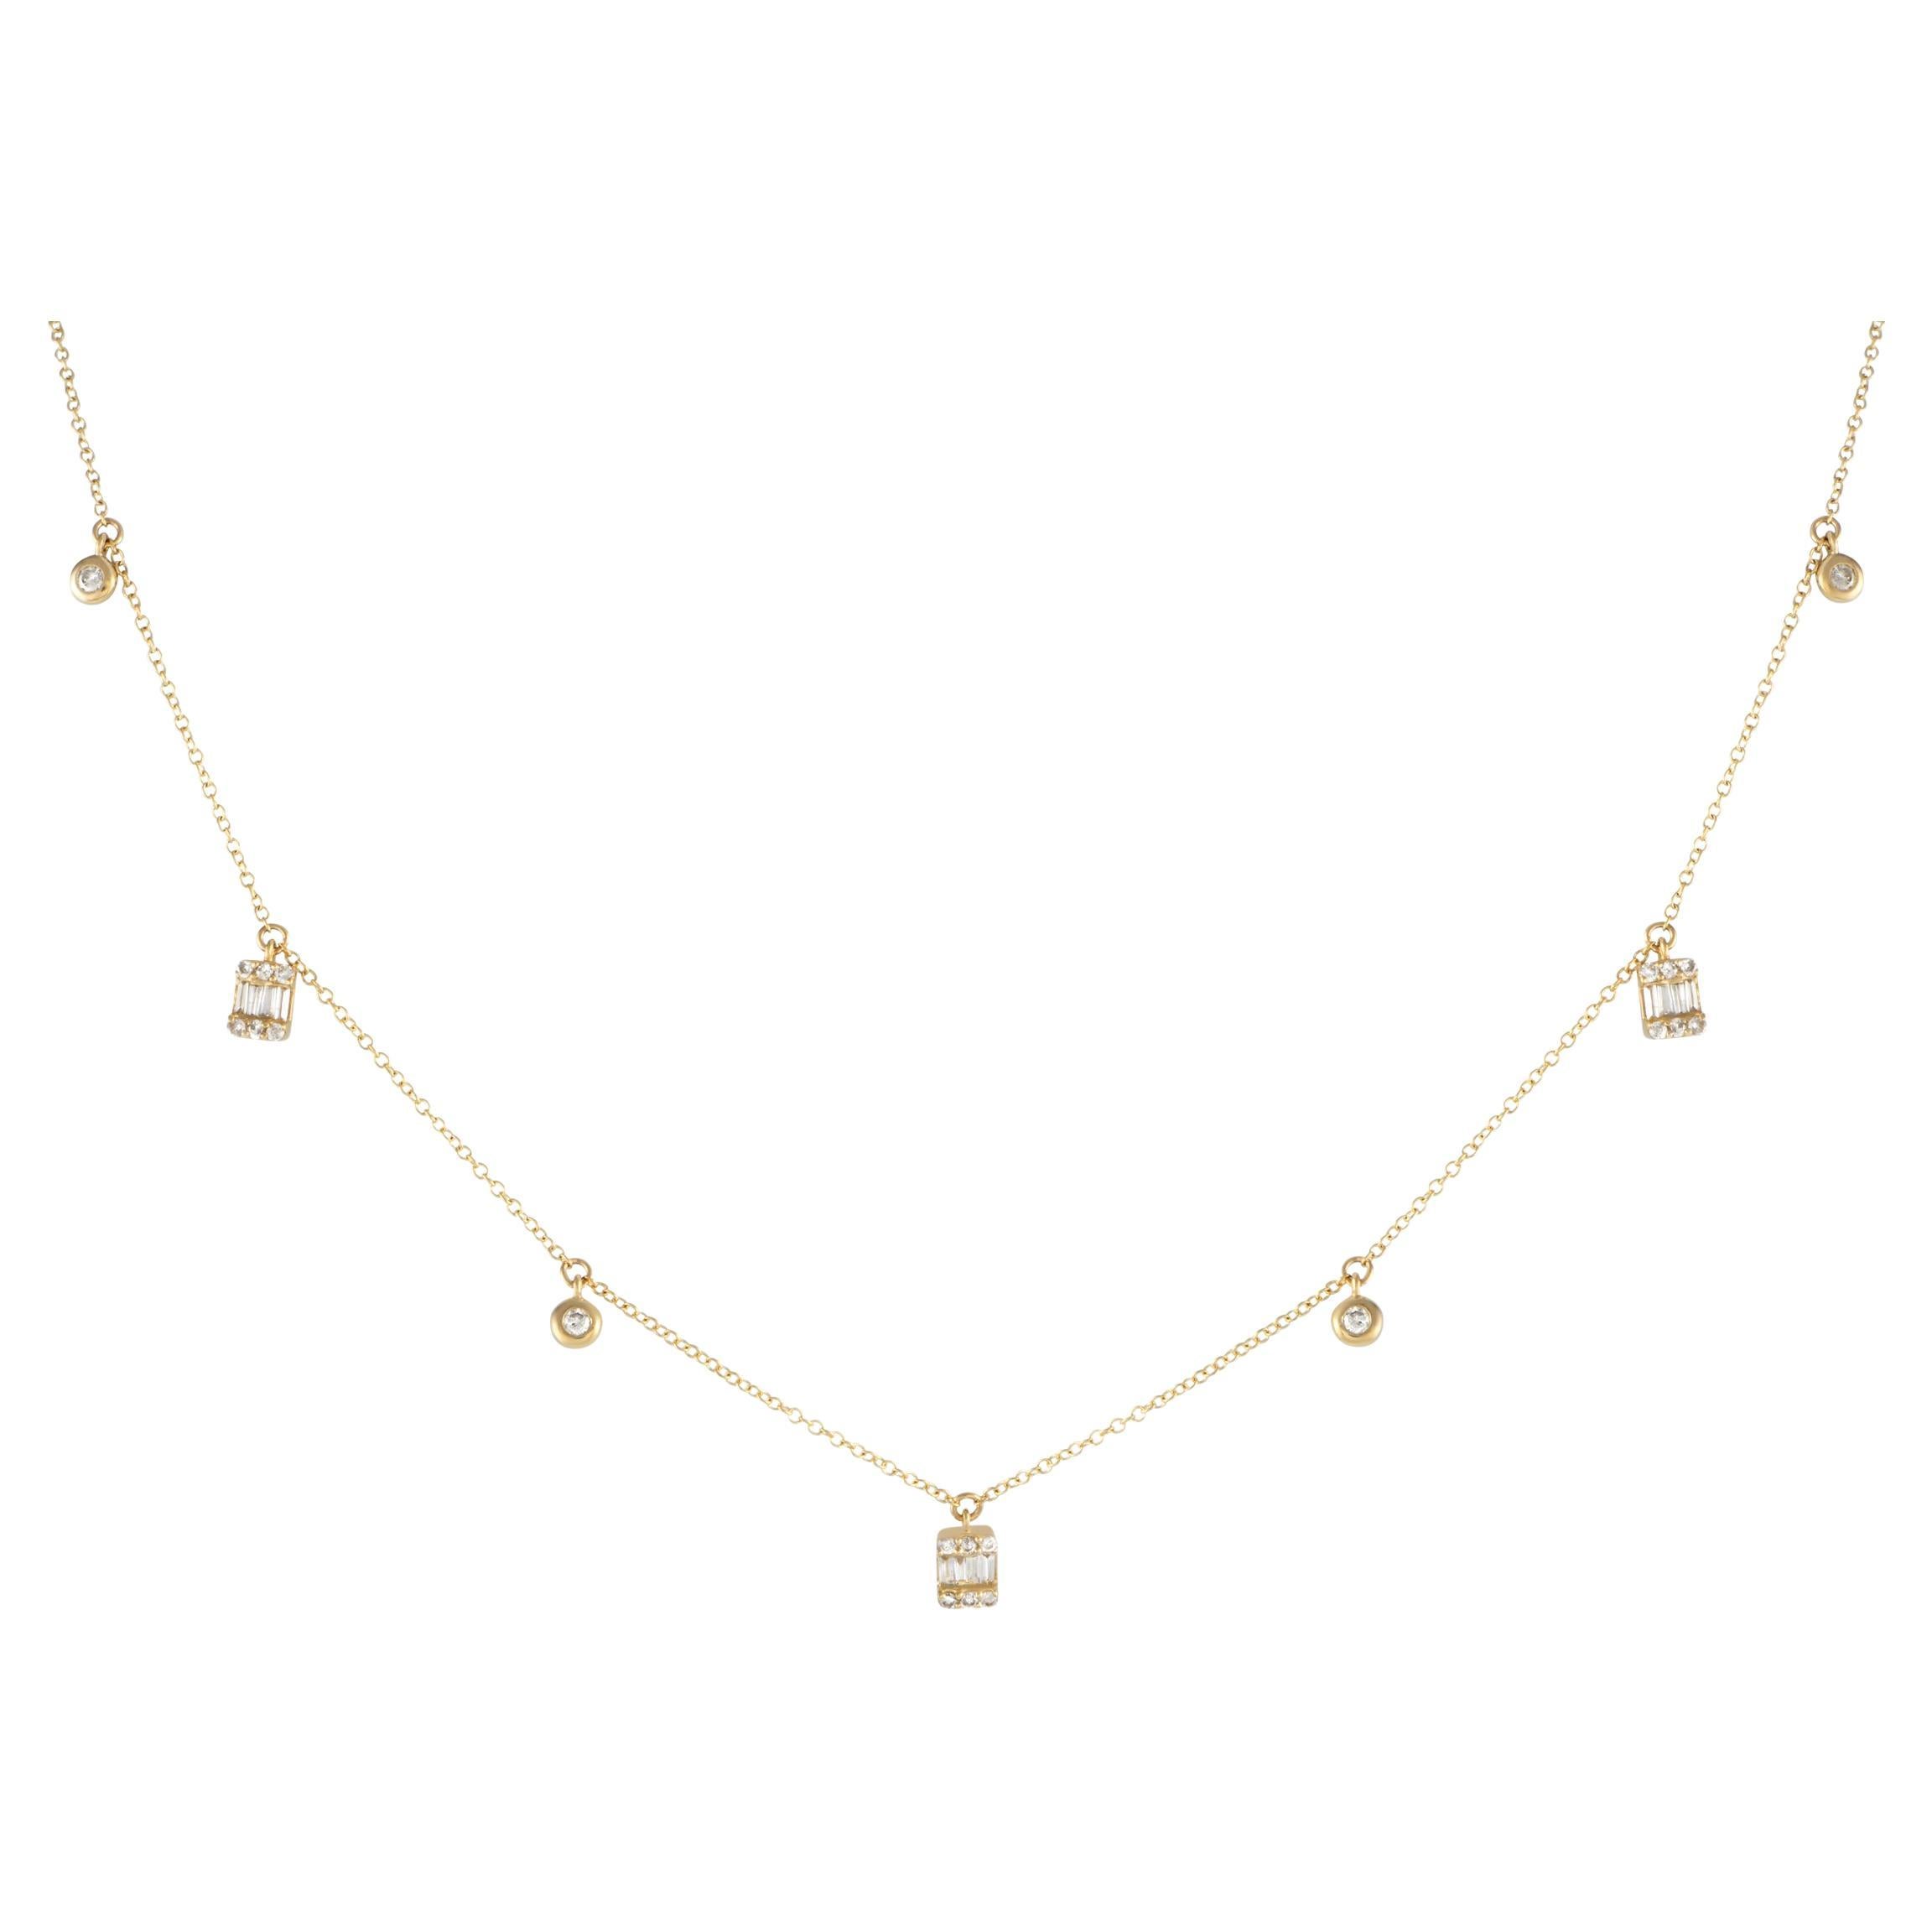 LB Exclusive 14K Yellow Gold 0.26ct Diamond Station Necklace NK01349 For Sale